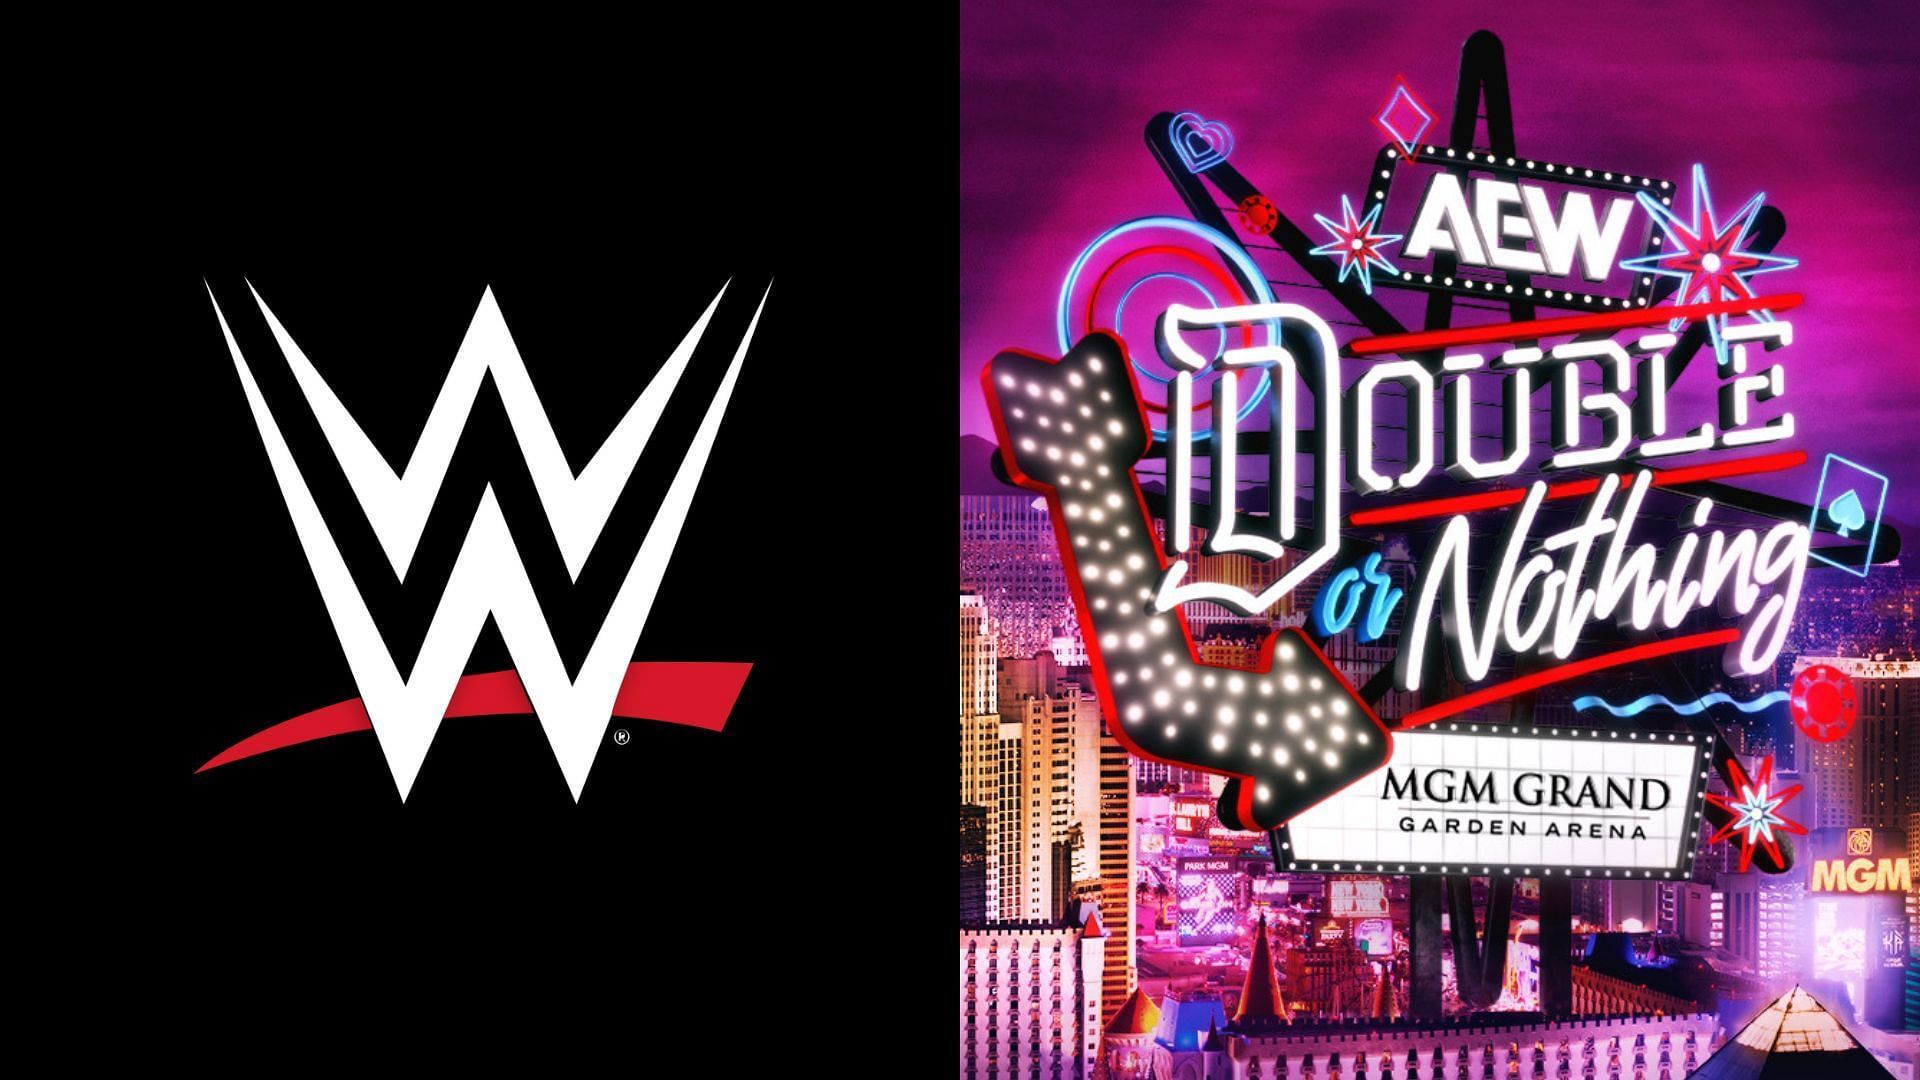 AEW Double or Nothing is taking place on May 26th [Photo courtesy of AEW